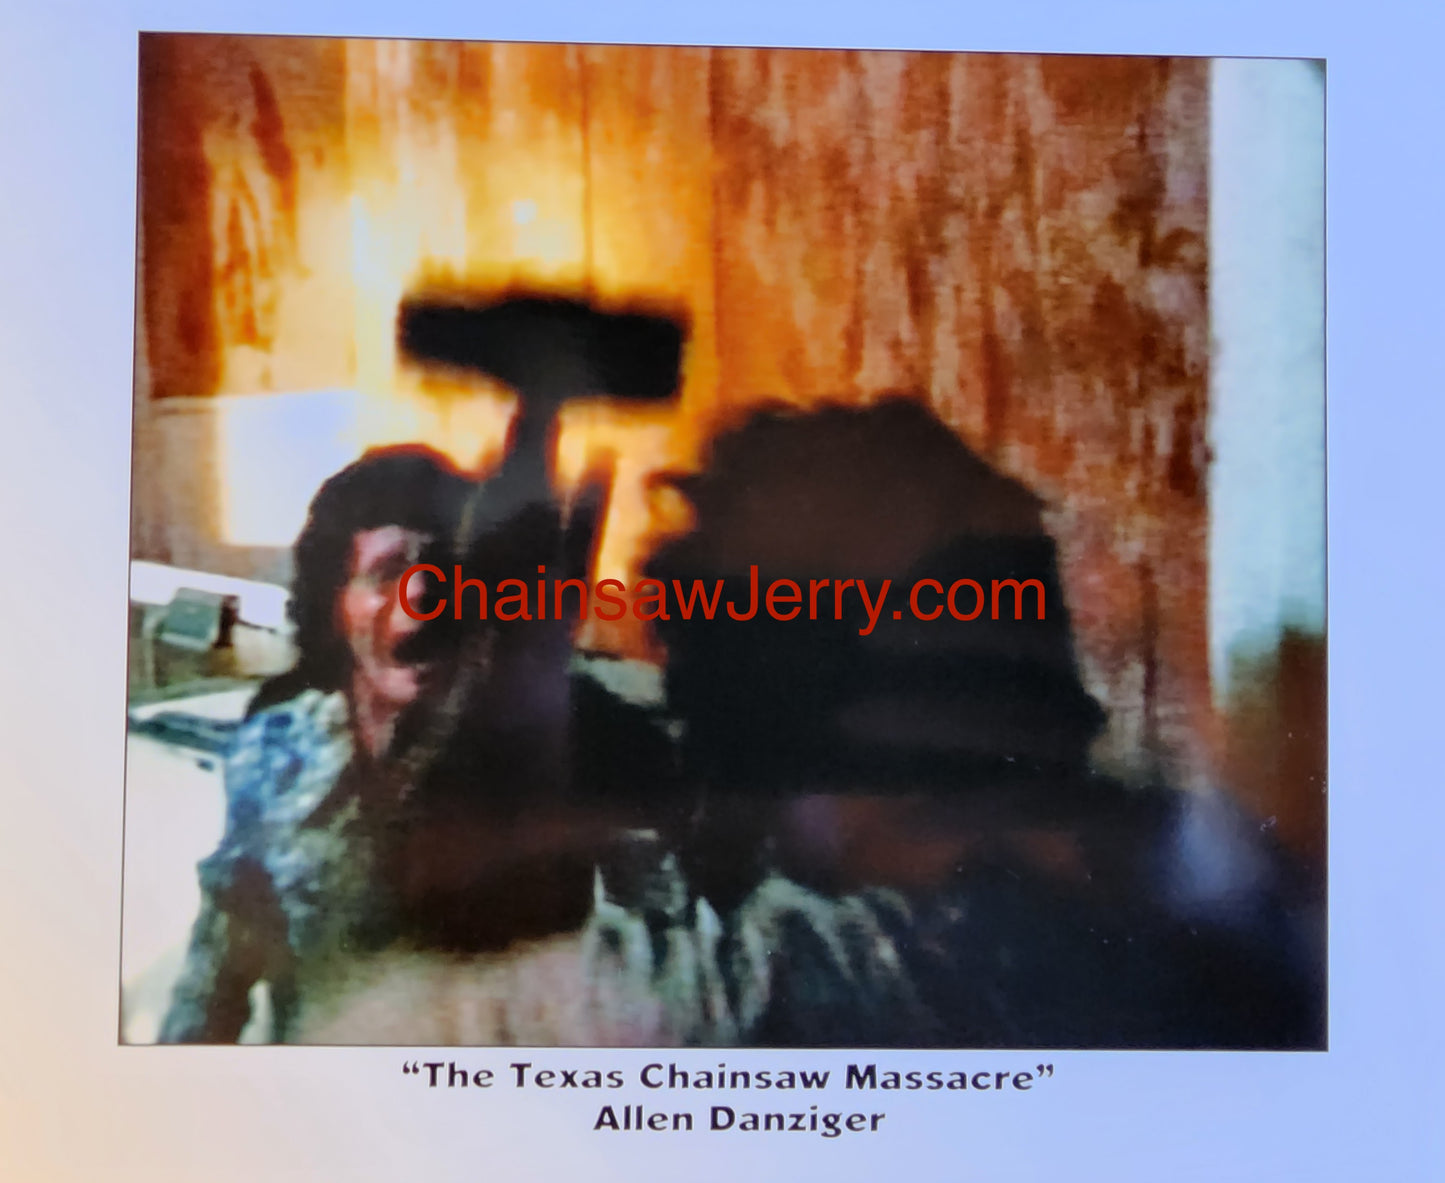 Texas Chainsaw Massacre "Hammertime" Photo Signed by Allen Danziger